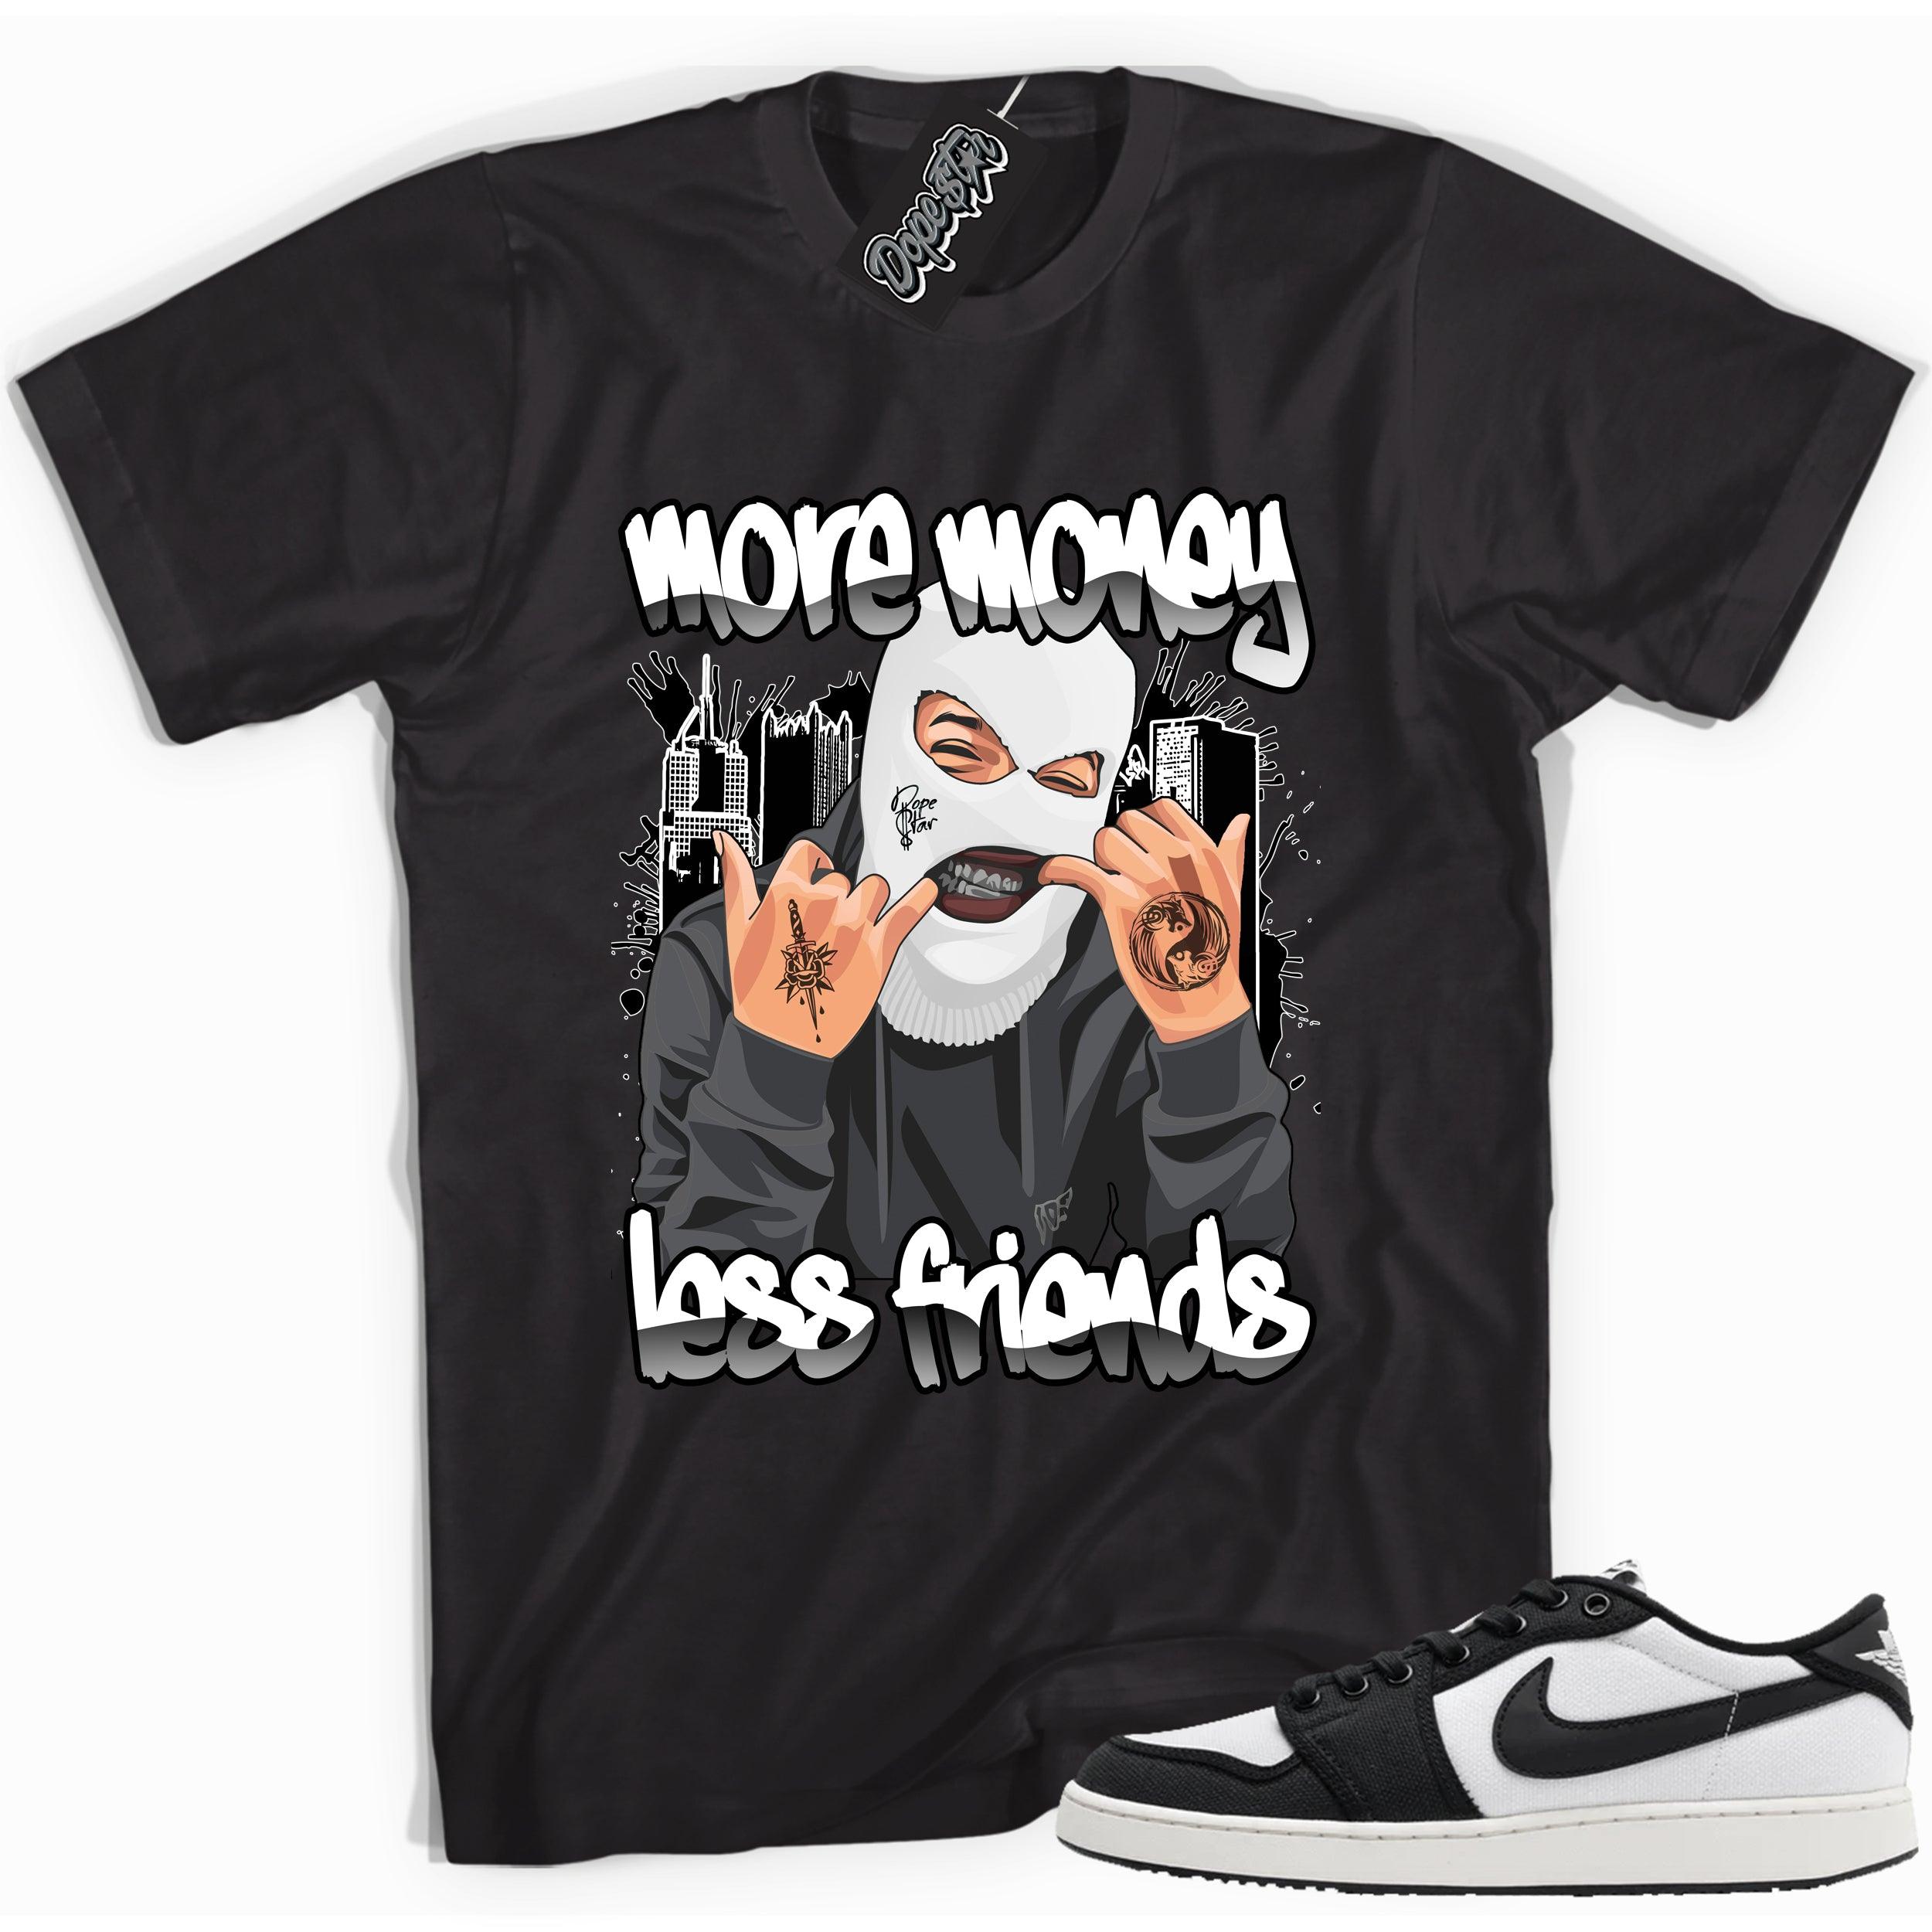 Cool black graphic tee with 'more money less friends' print, that perfectly matches Air Jordan 1 Retro Ajko Low Black & White sneakers.